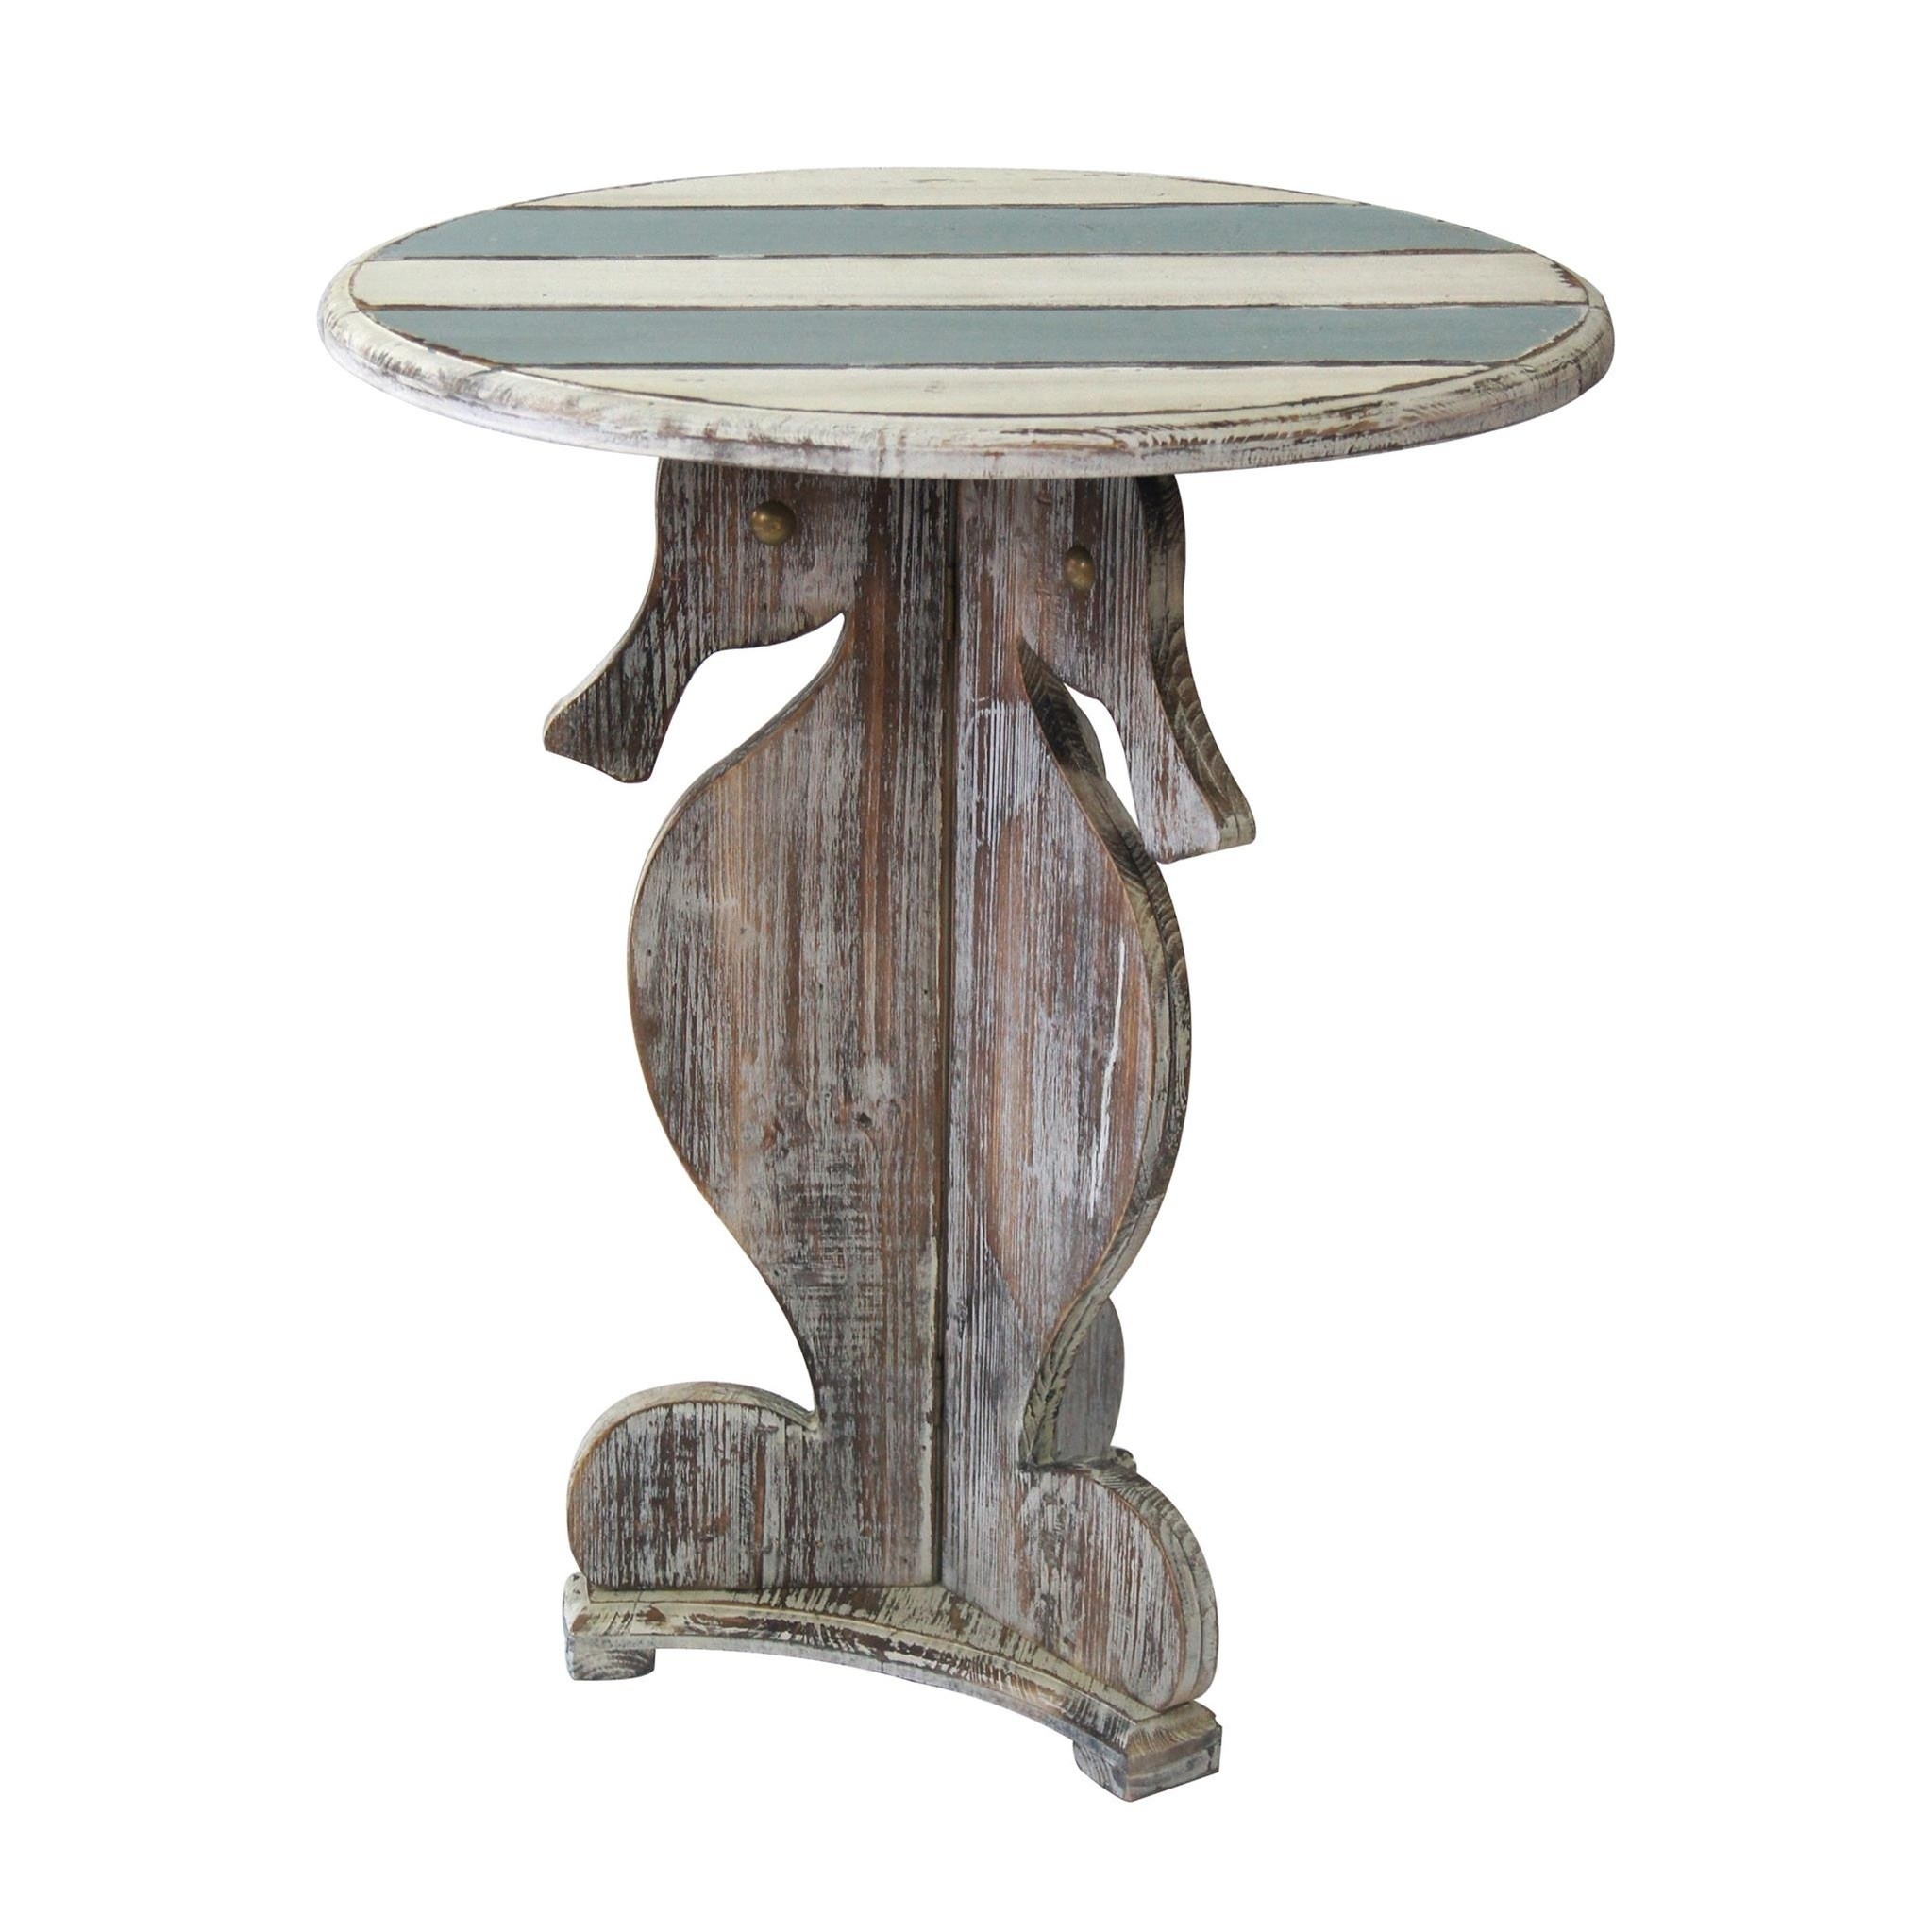 nantucket seahorse accent table free shipping today bengal manor mango wood twist distressed furniture wicker side indoor apothecary coffee narrow bedside ideas cool tables